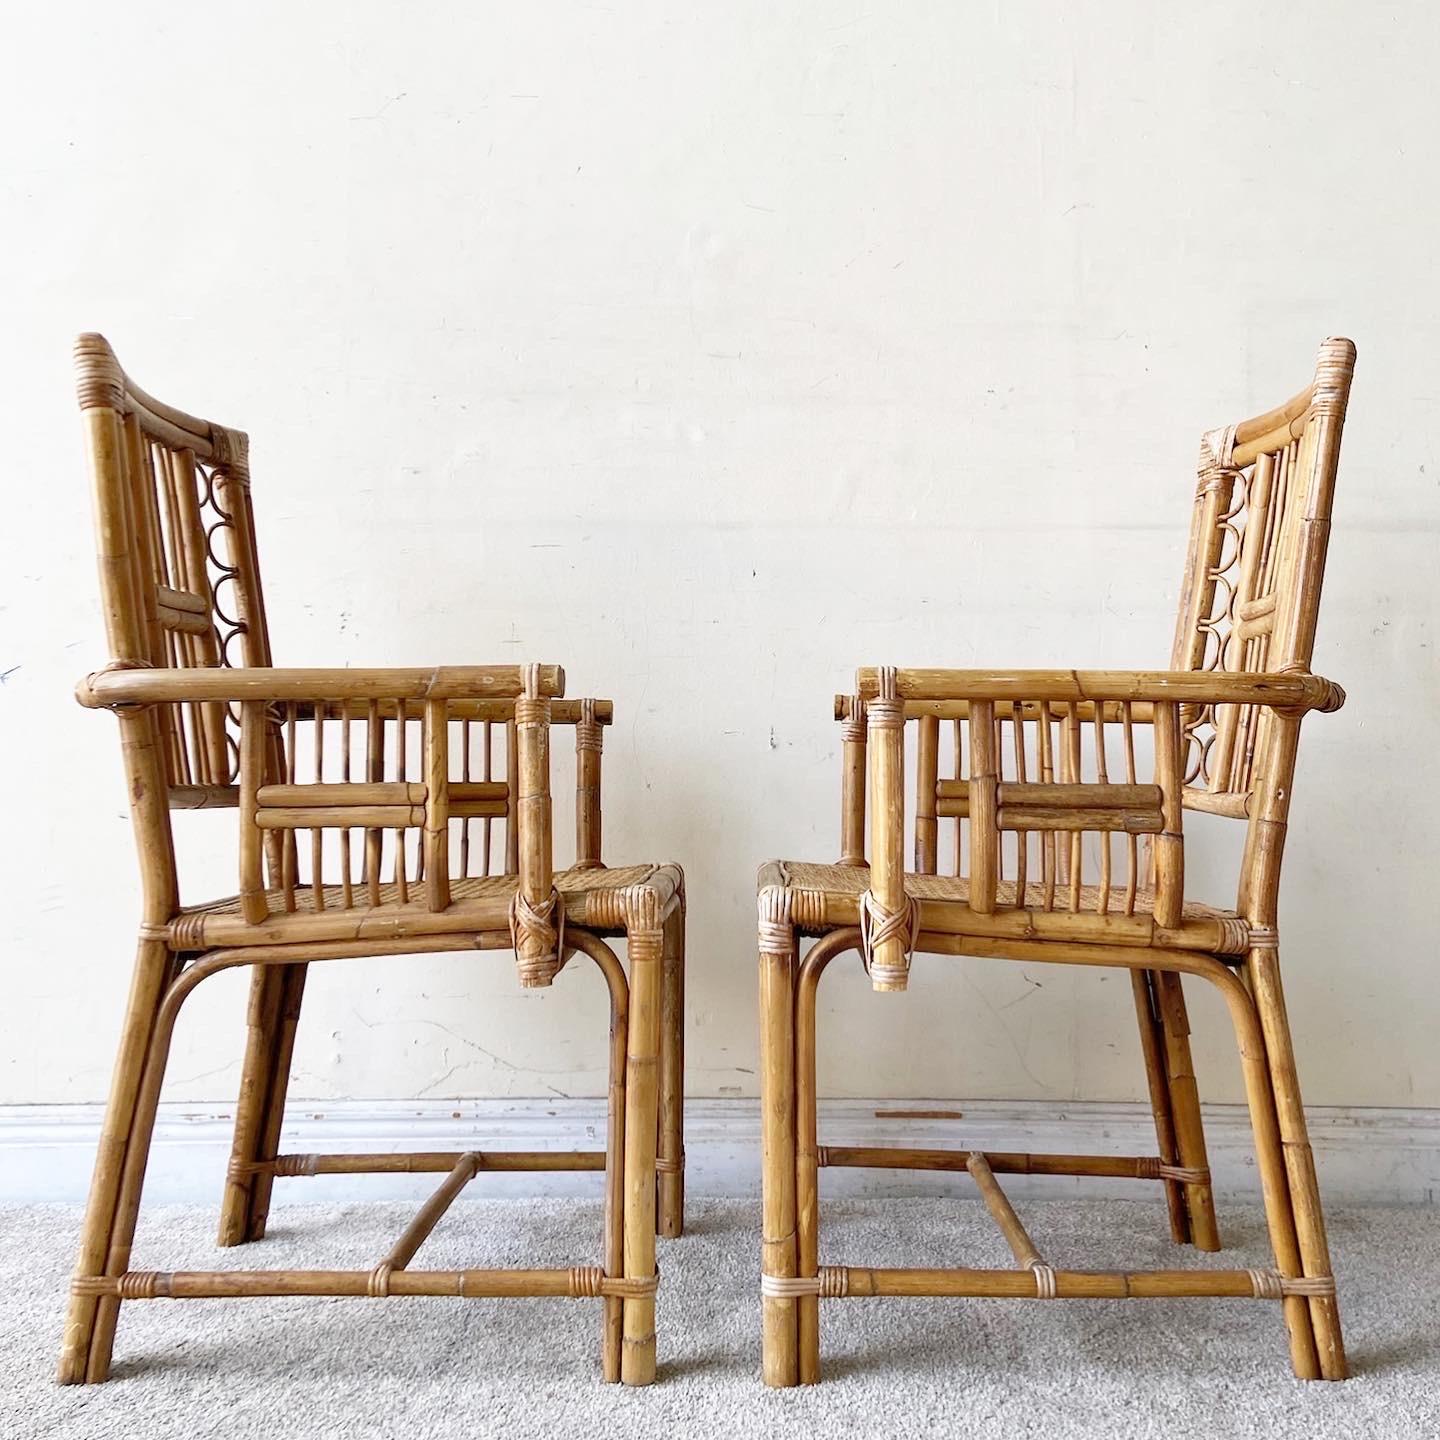 Bohemian 1980s, Boho Chic Bamboo Rattan and Cane Dining Chairs Attributed to Brighton